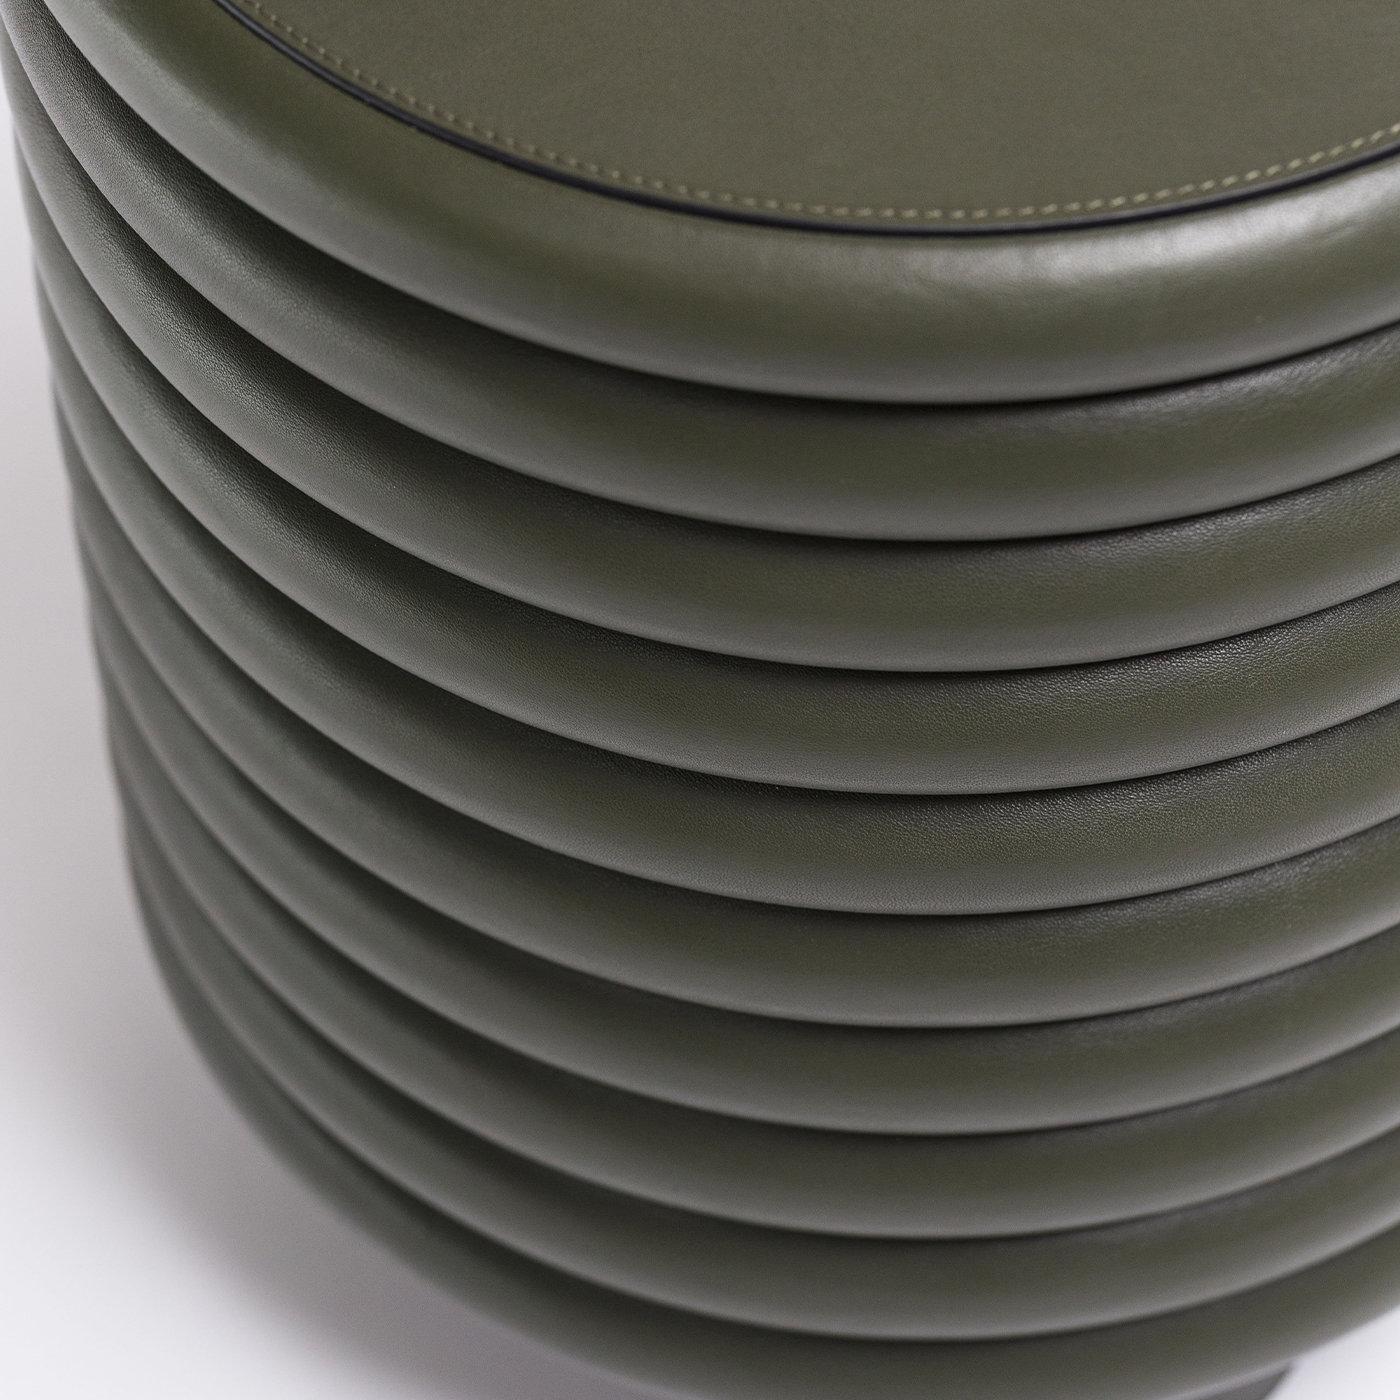 Contemporary round leather stool Scala by Stephane Parmentier for Giobagnara.
The object presented in the image has following finish: F02 Loden Green Nappa Leather

Part of the Scala Collection of furniture pieces, this stool is characterized by